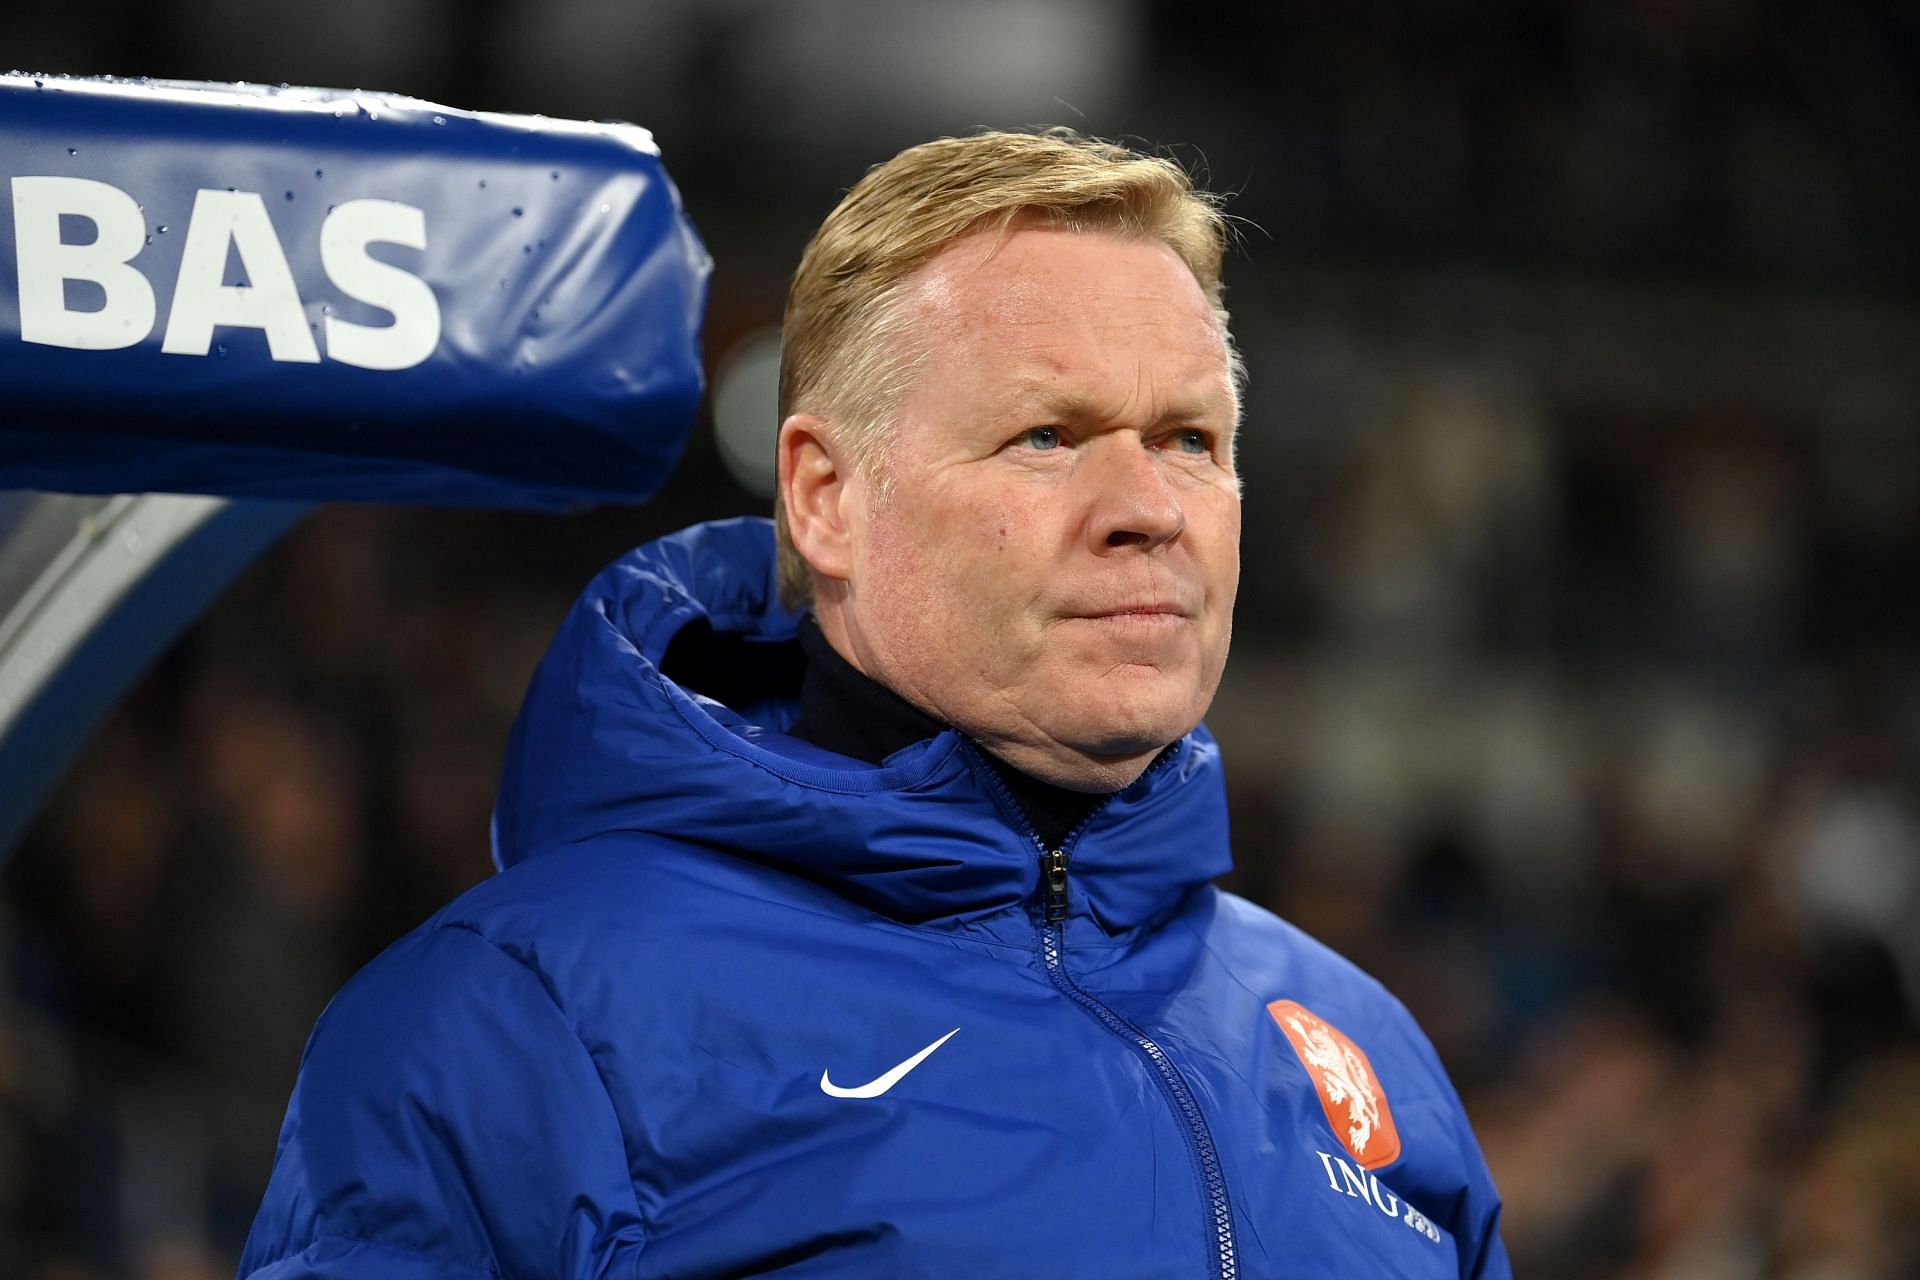 Koeman has named his side for the upcoming Nations League clashes